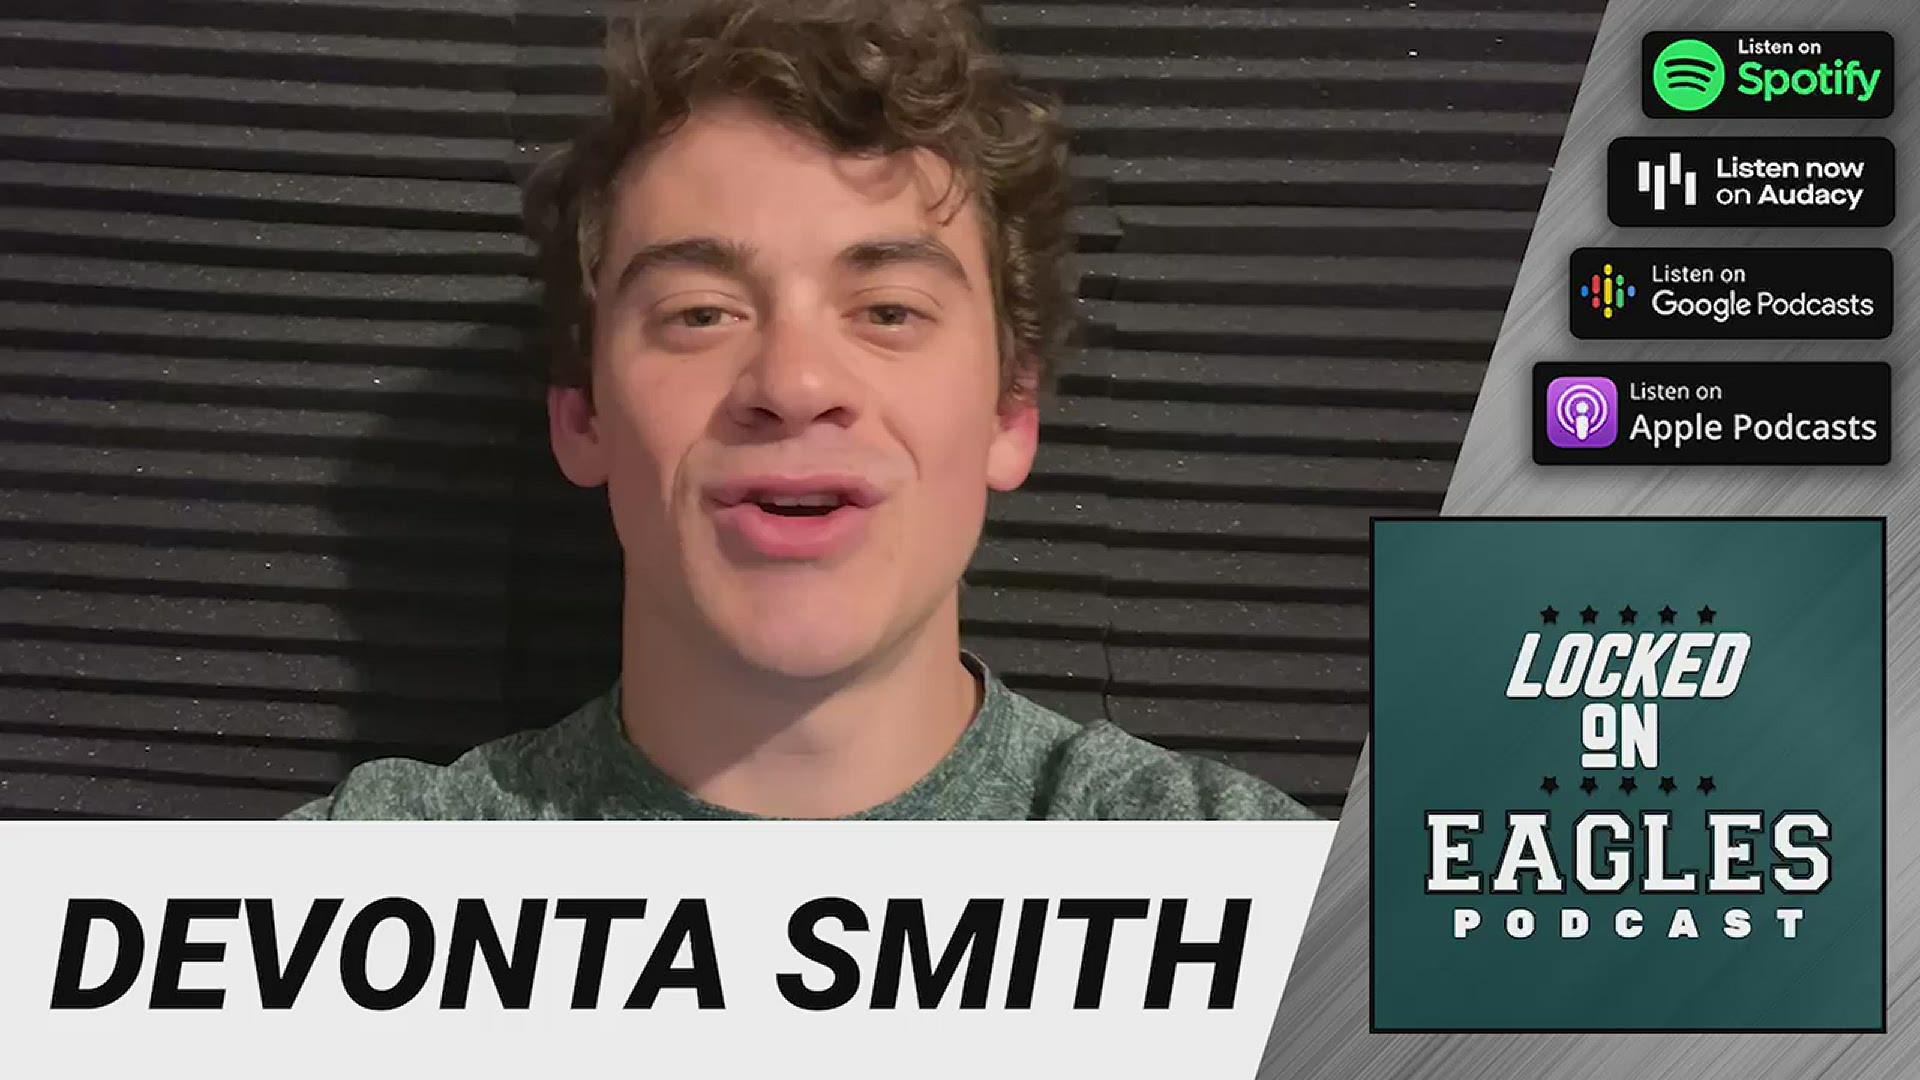 The Locked On staff react to the Eagles selecting DeVonta Smith 4th in the 2021 NFL draft.